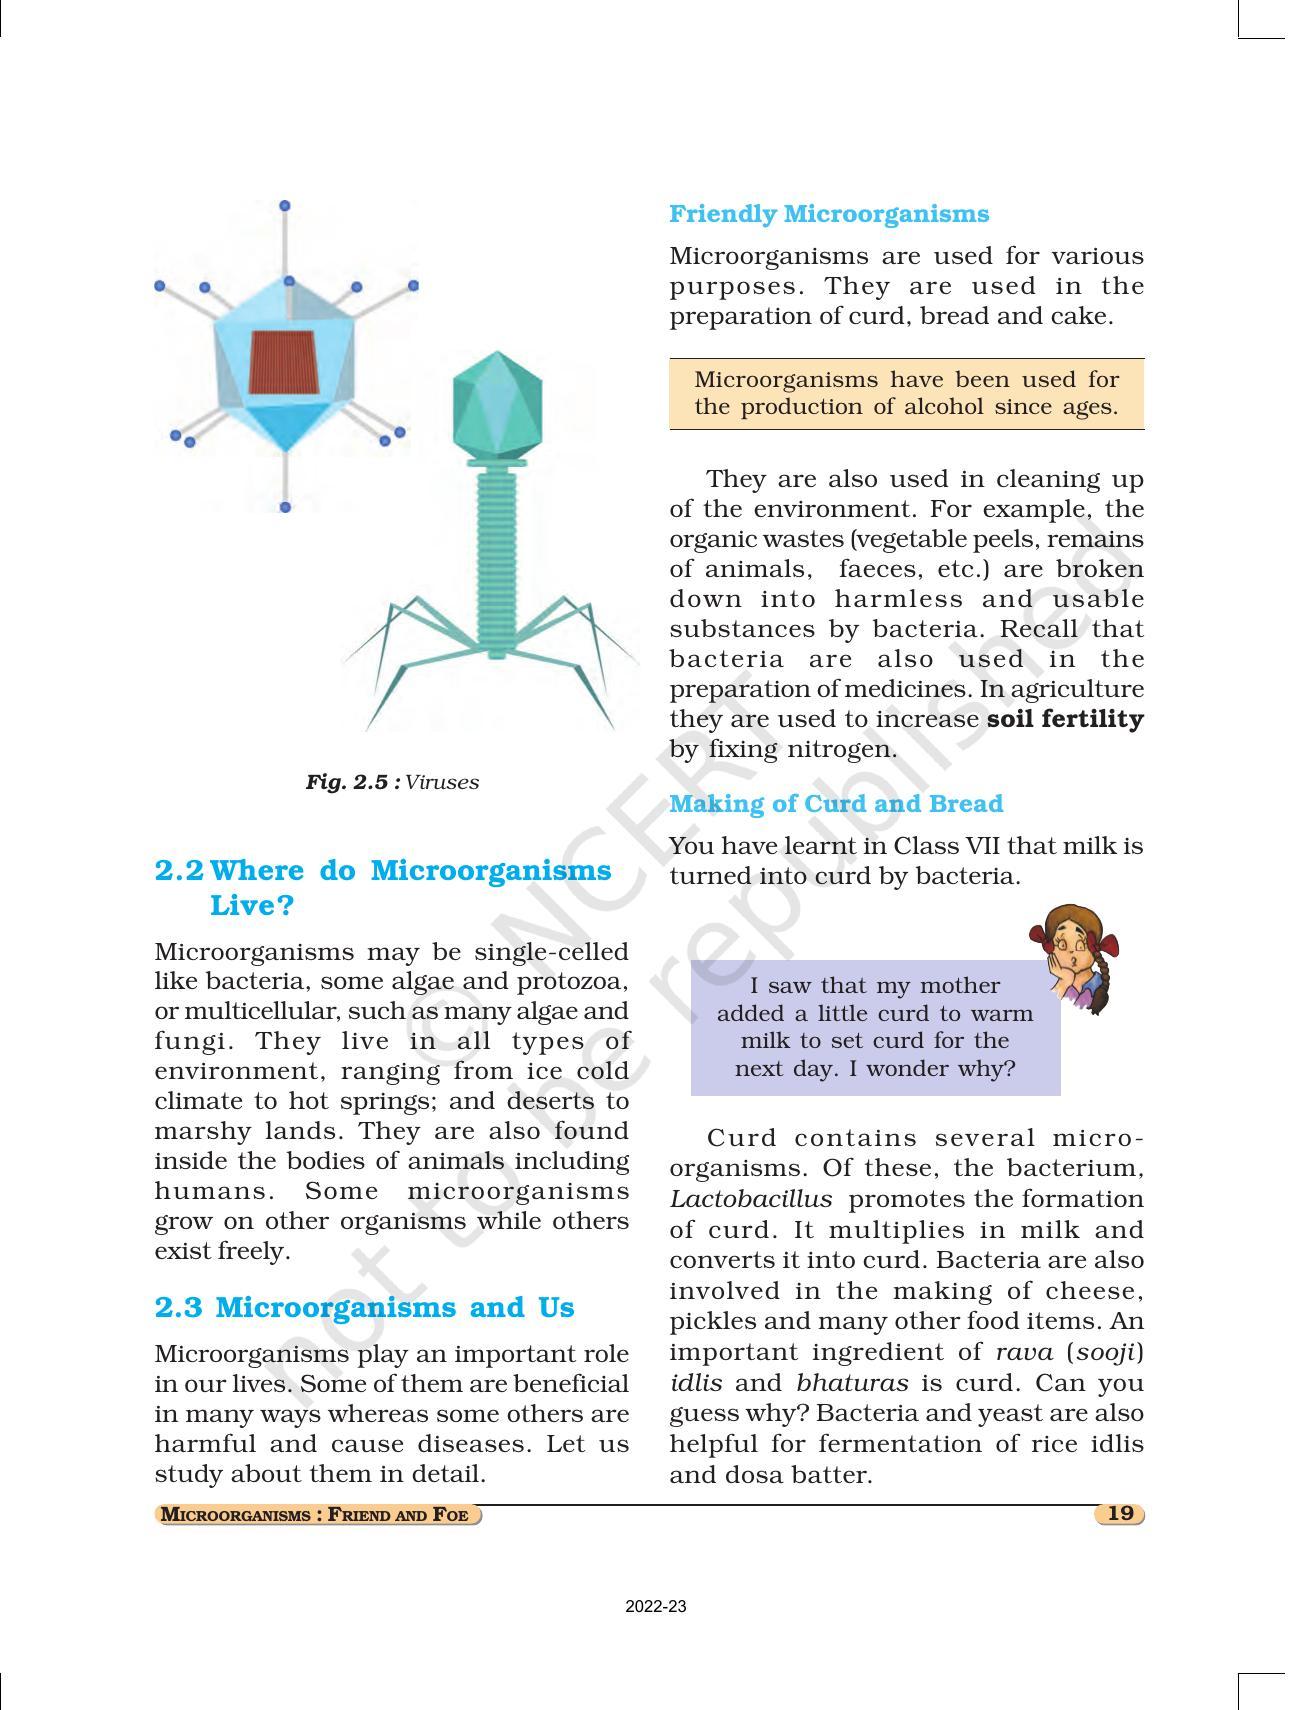 NCERT Book for Class 8 Science Chapter 2 Microorganisms: Friend and Foe - Page 3